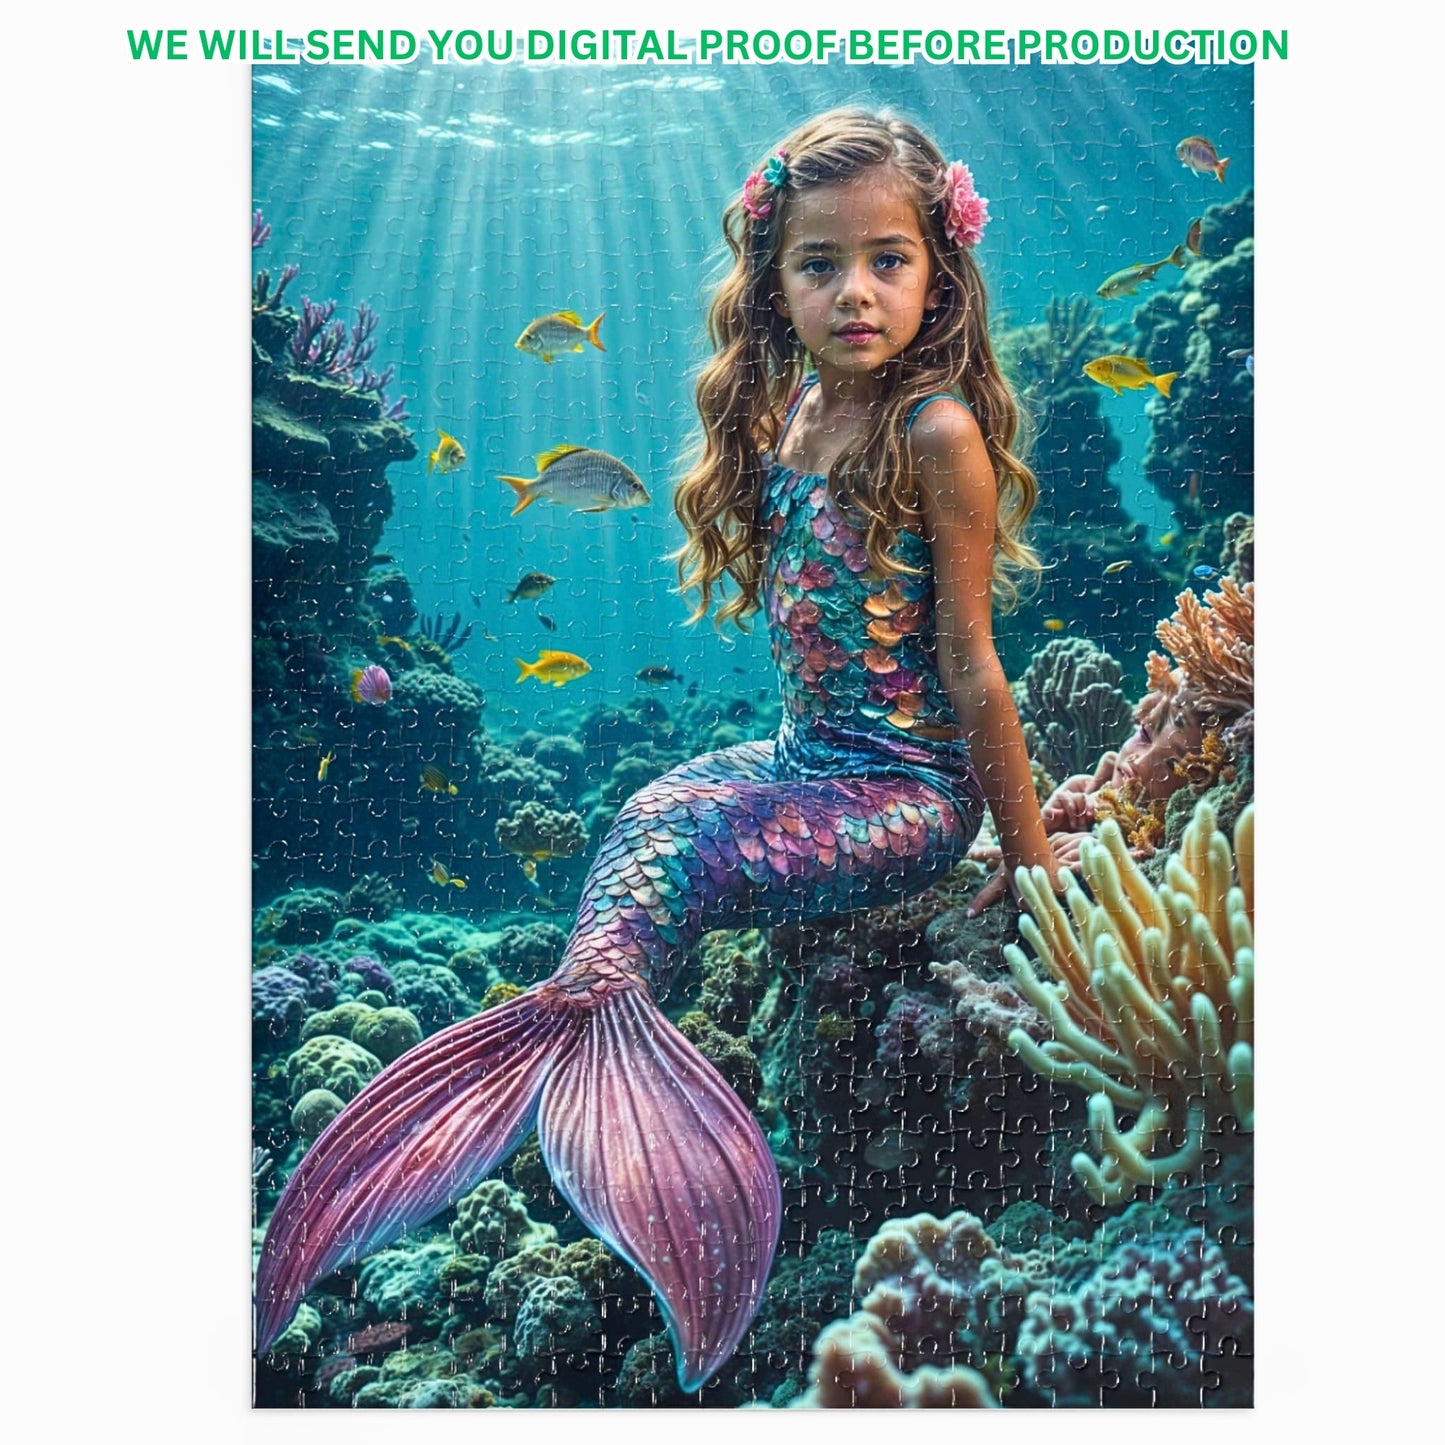 Custom Puzzle From Photo, Mermaid, Personalized Puzzle 252-1000 Pieces, Adult Jigsaw, Gift for Daughter, Sister Gift, Gift for Family. MP2